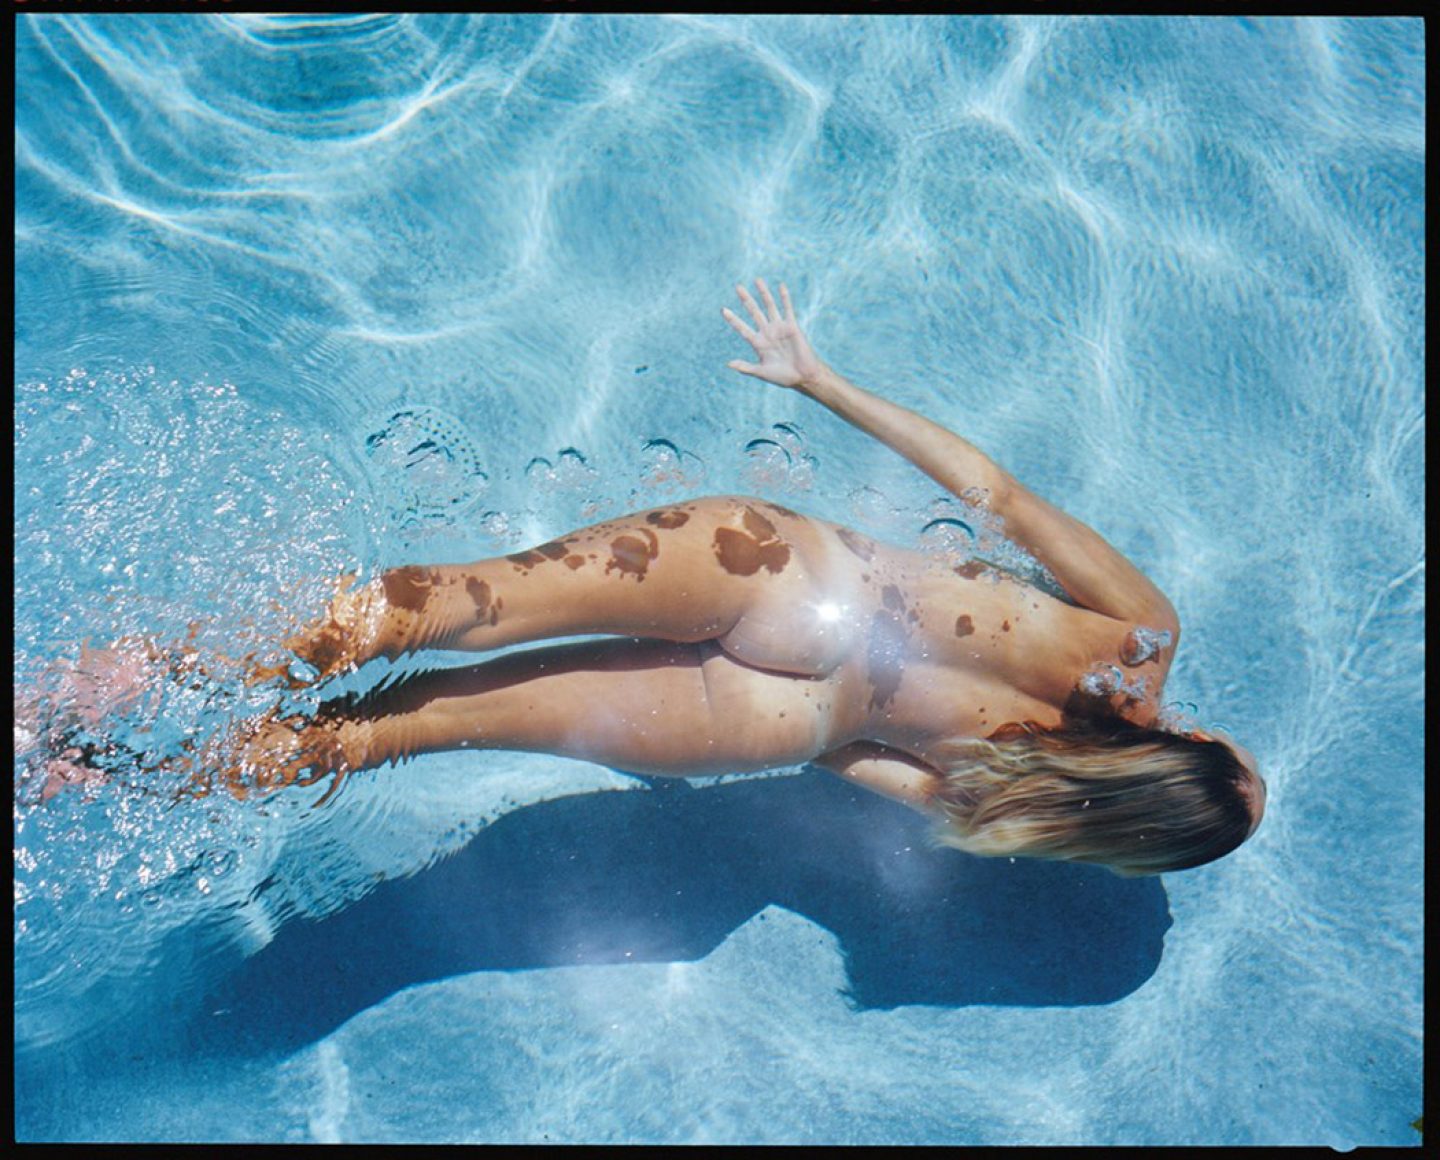 iGNANT_Photography_Deanna_Templeton_The_Swimming_Pool_9